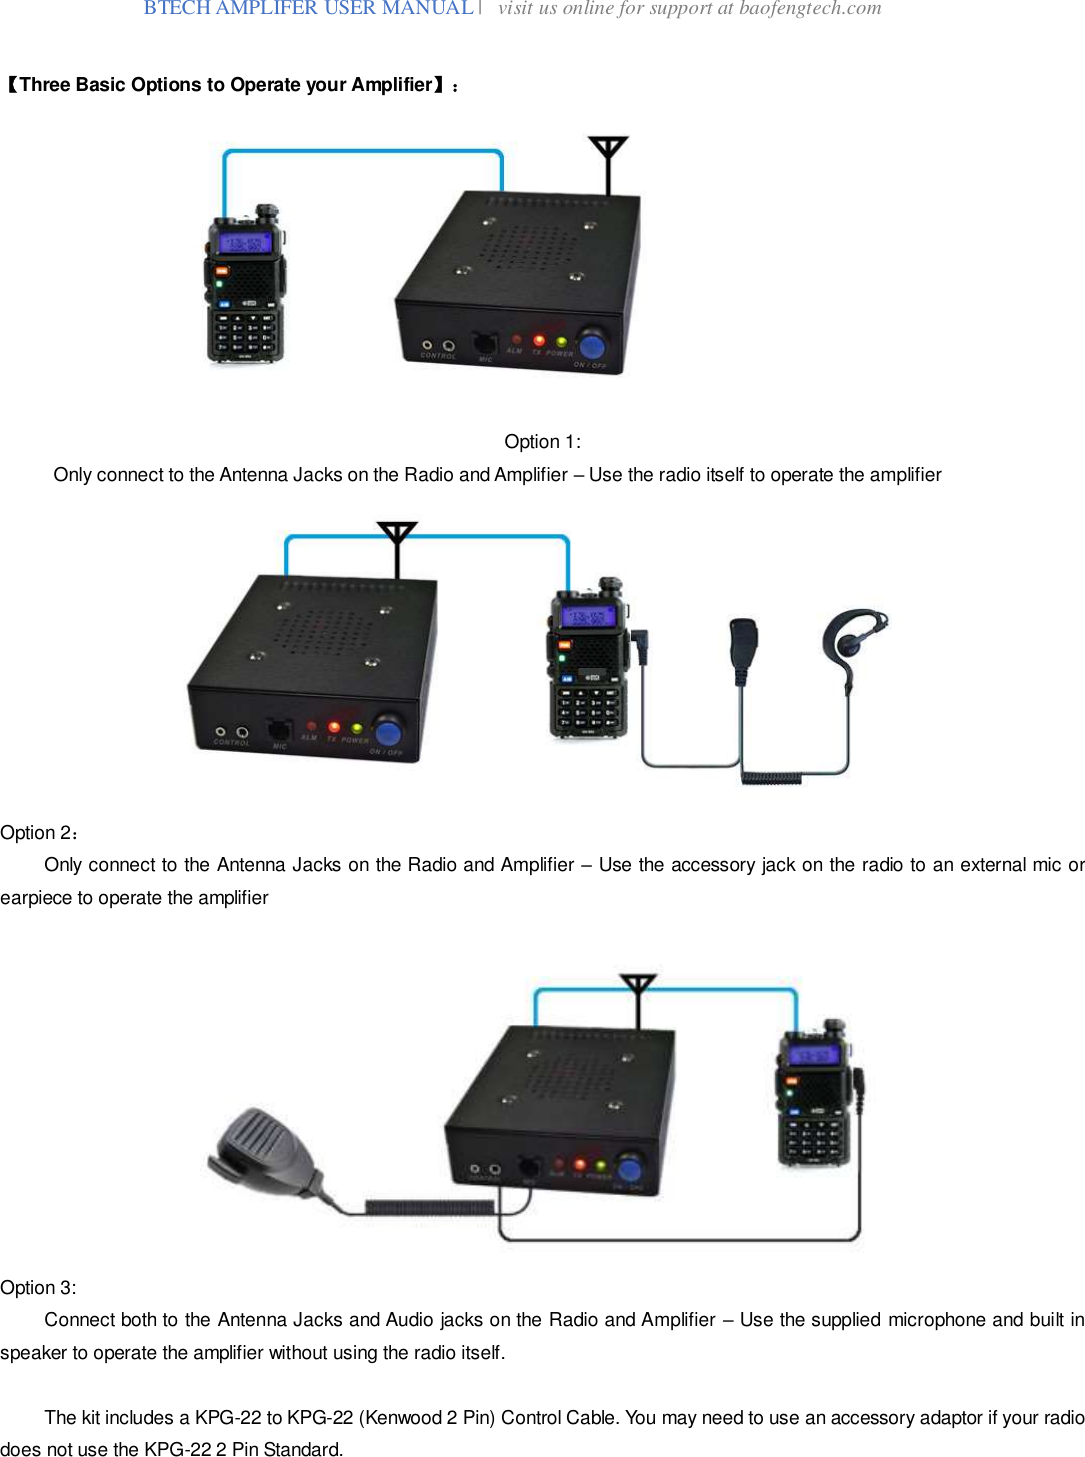  BTECH AMPLIFER USER MANUAL |   visit us online for support at baofengtech.com  【Three Basic Options to Operate your Amplifier】：             Option 1:   Only connect to the Antenna Jacks on the Radio and Amplifier – Use the radio itself to operate the amplifier         Option 2：   Only connect to the Antenna Jacks on the Radio and Amplifier – Use the accessory jack on the radio to an external mic or earpiece to operate the amplifier     Option 3:  Connect both to the Antenna Jacks and Audio jacks on the Radio and Amplifier – Use the supplied microphone and built in speaker to operate the amplifier without using the radio itself.    The kit includes a KPG-22 to KPG-22 (Kenwood 2 Pin) Control Cable. You may need to use an accessory adaptor if your radio does not use the KPG-22 2 Pin Standard.   